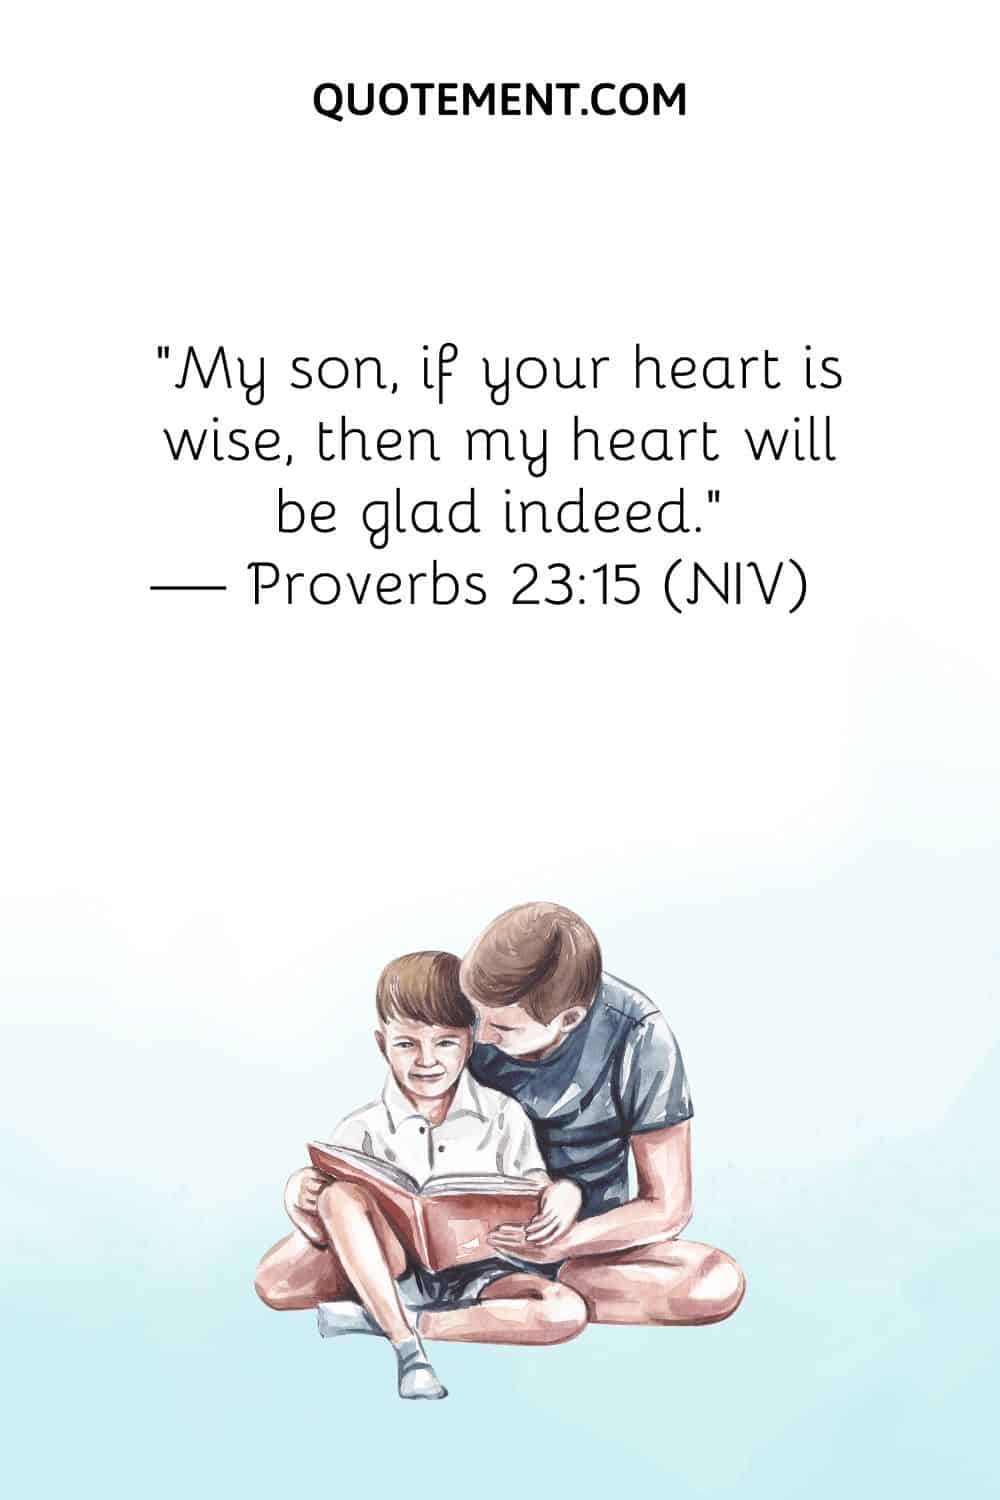 My son, if your heart is wise, then my heart will be glad indeed